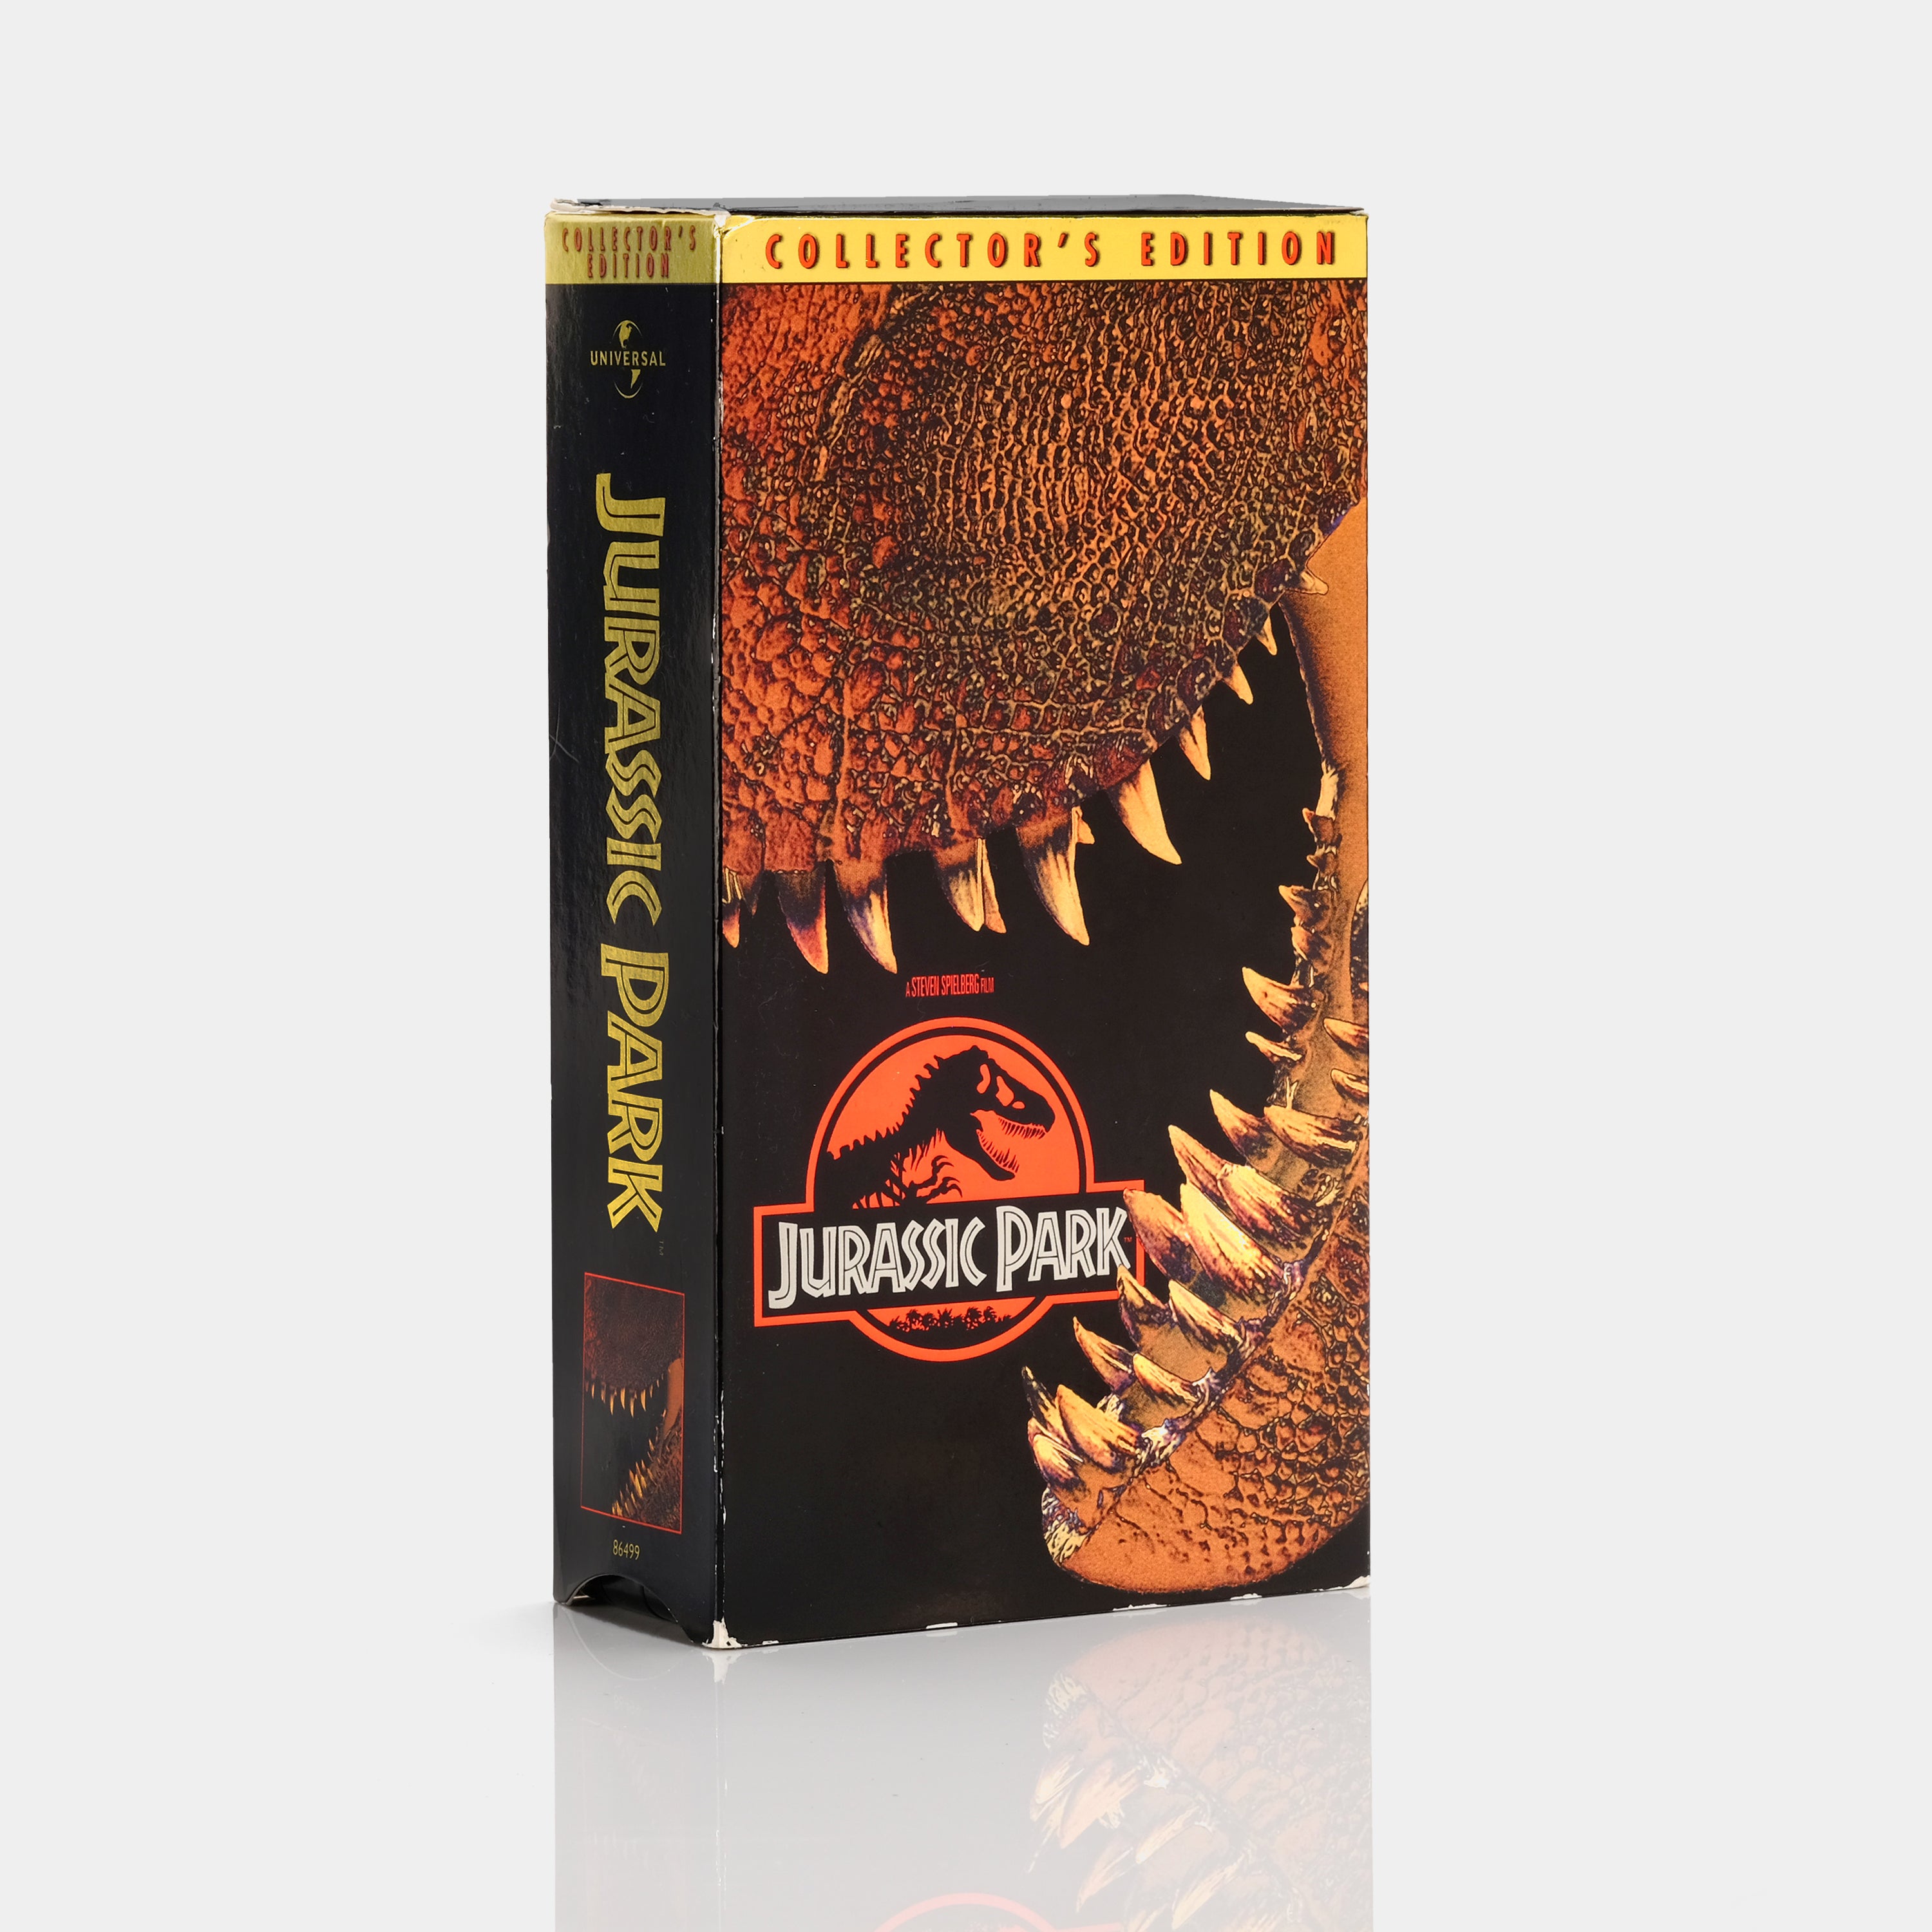 Jurassic Park: Collector's Edition VHS Tape Set